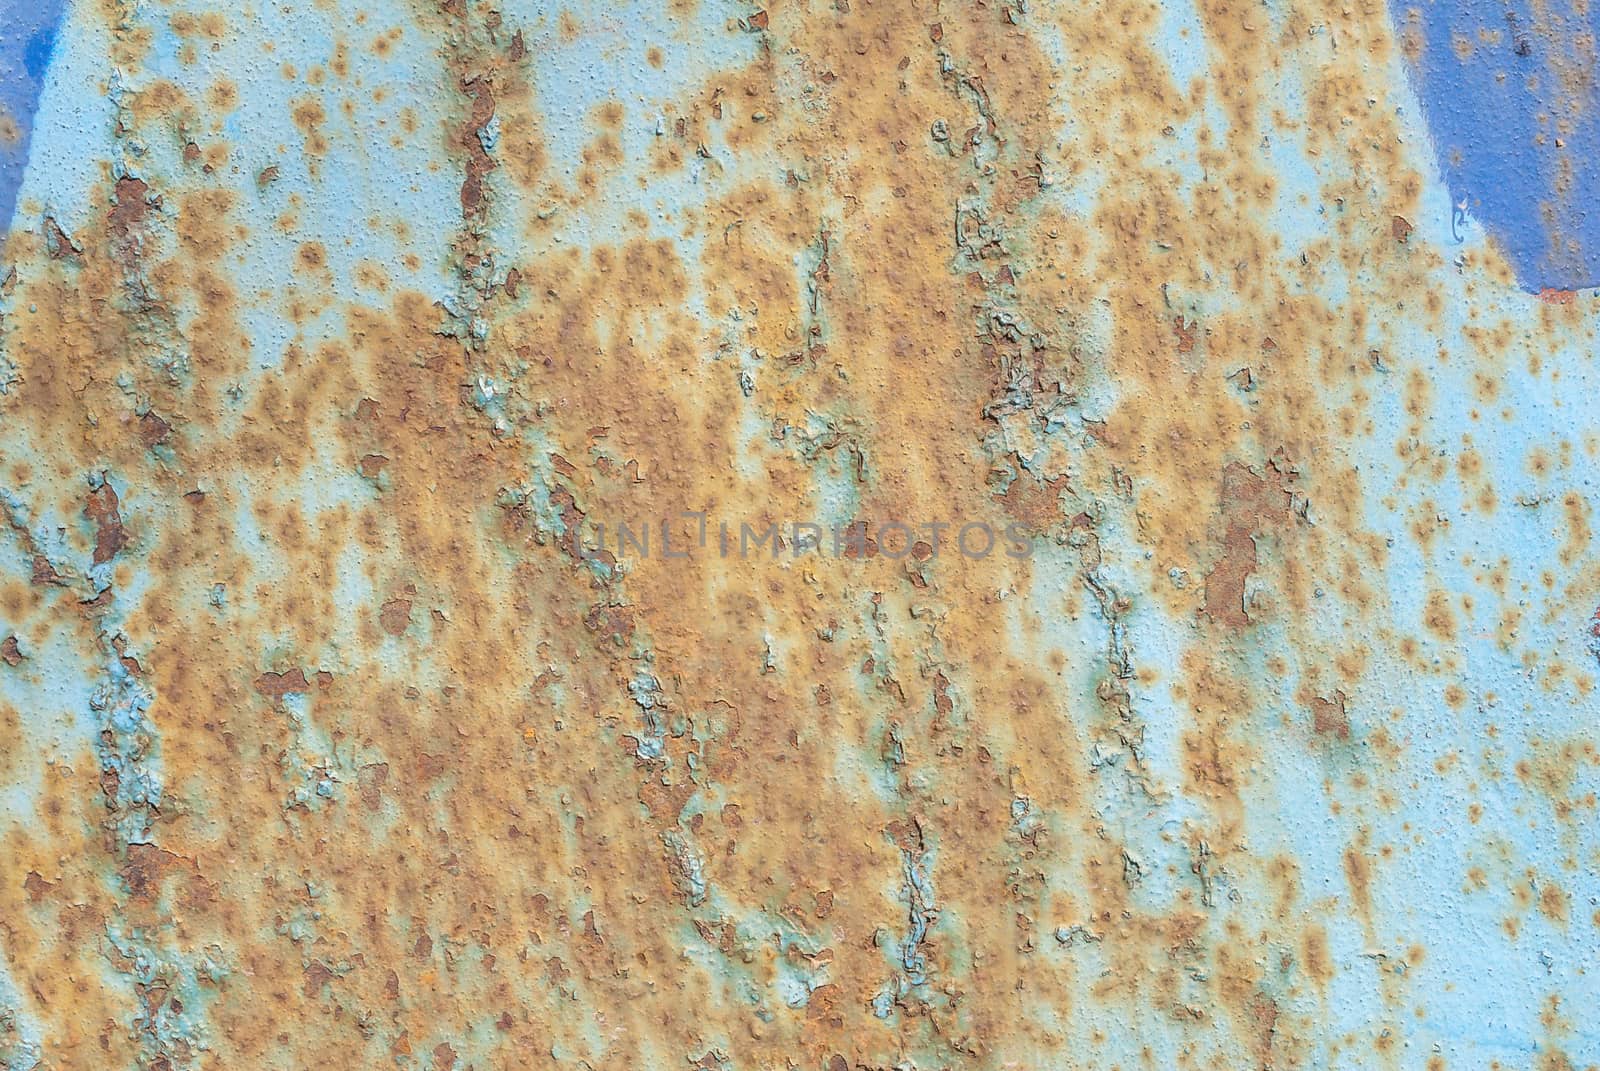 chipped paint, grunge metal surface, which has long been under the influence of different climatic conditions